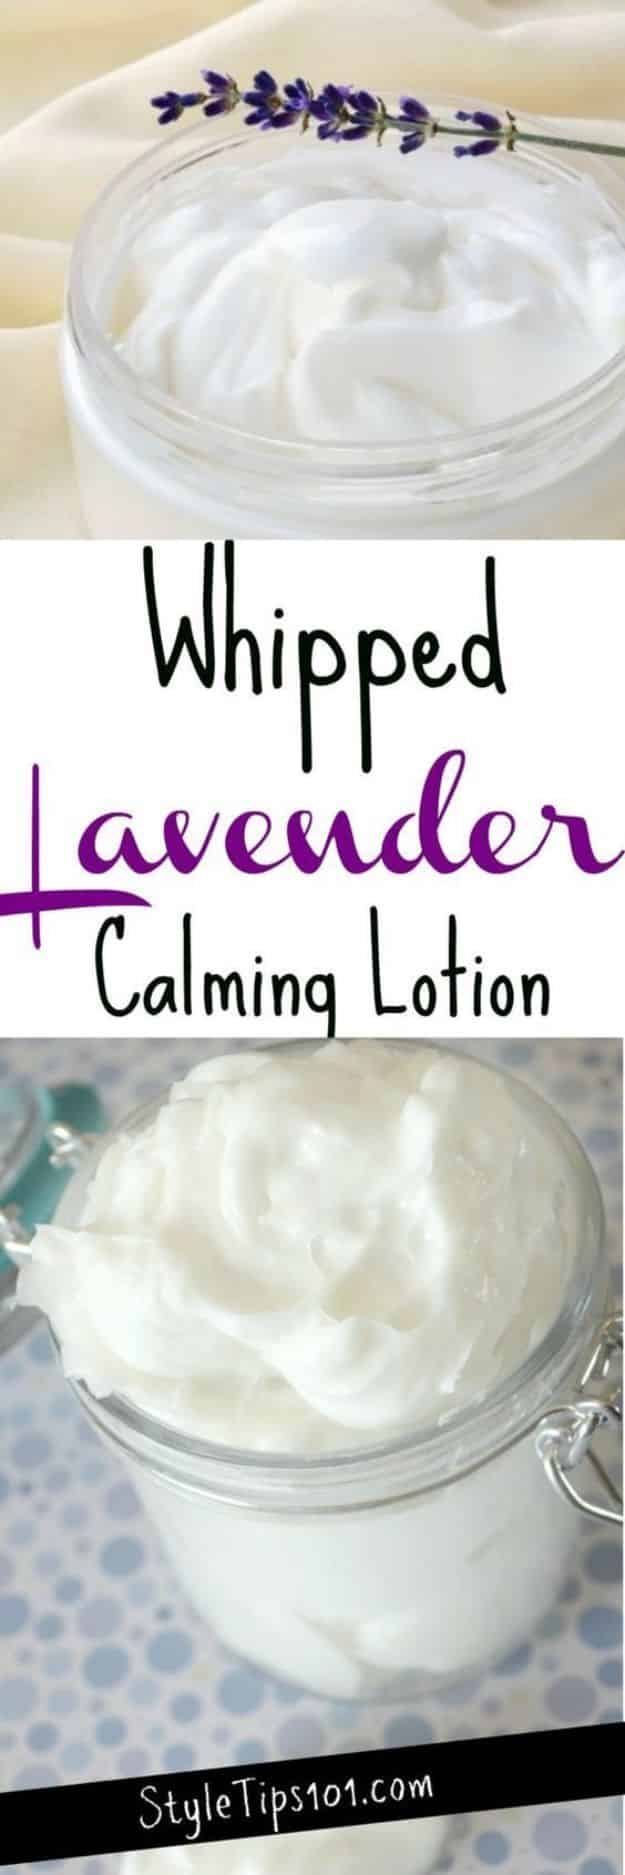 DIY Lotion Recipes - Homemade Calming Lotion With Lavender - How To Make Homemade Lotion - Natural Body and Skincare Recipe Ideas - Use Essential Oils, Coconut and Avocado and Shea Butter, Goats Milk, Lavender, Peppermint 